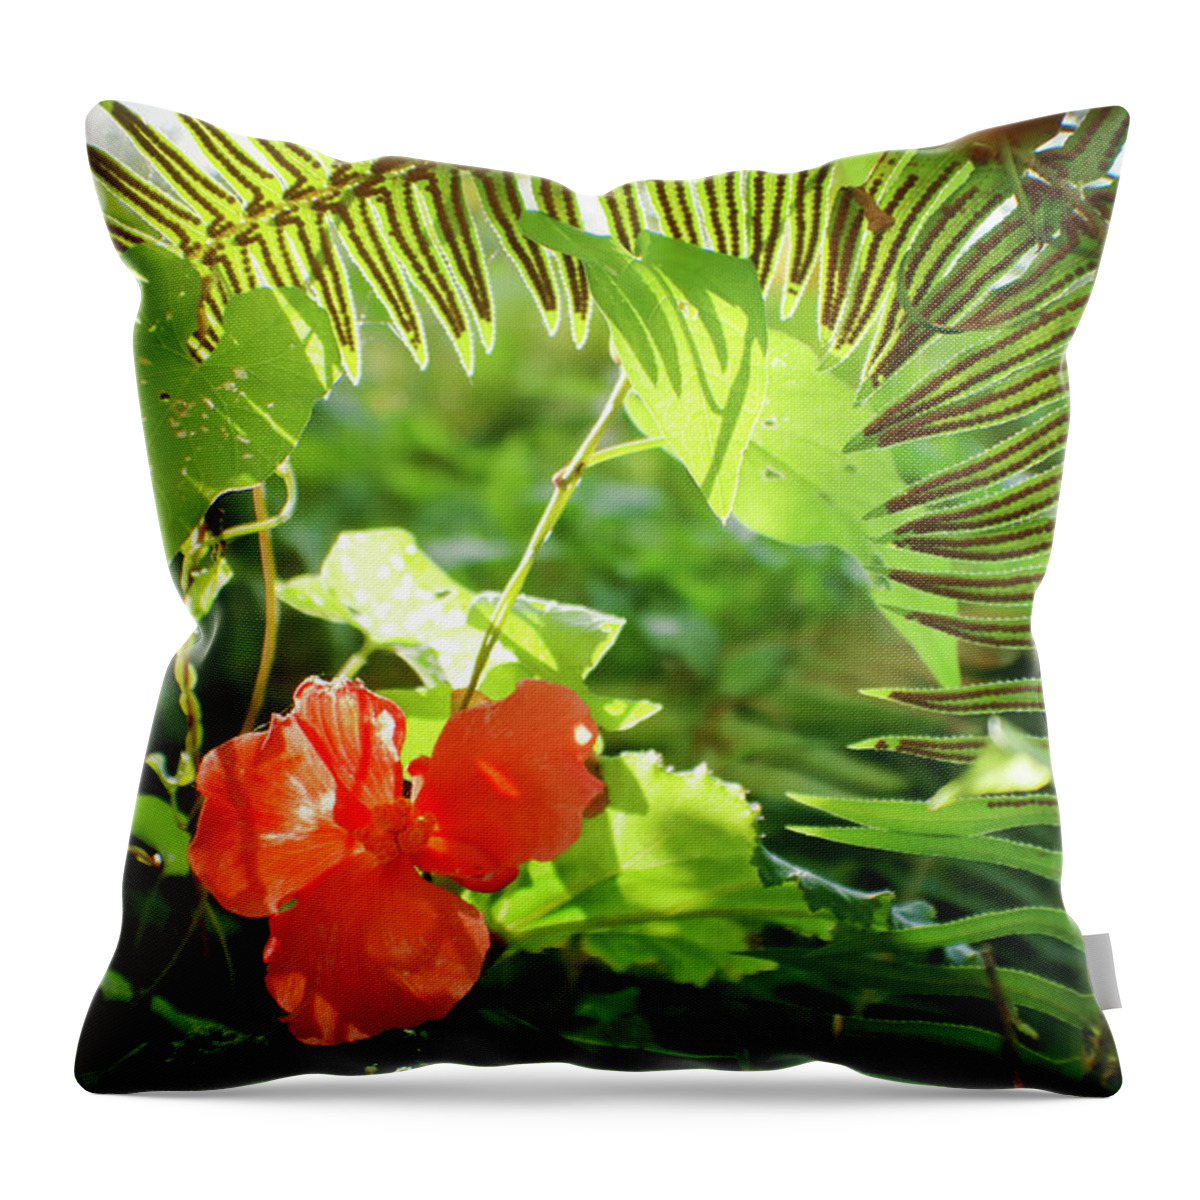 Adria Trail Throw Pillow featuring the photograph Jungle Begonia by Adria Trail